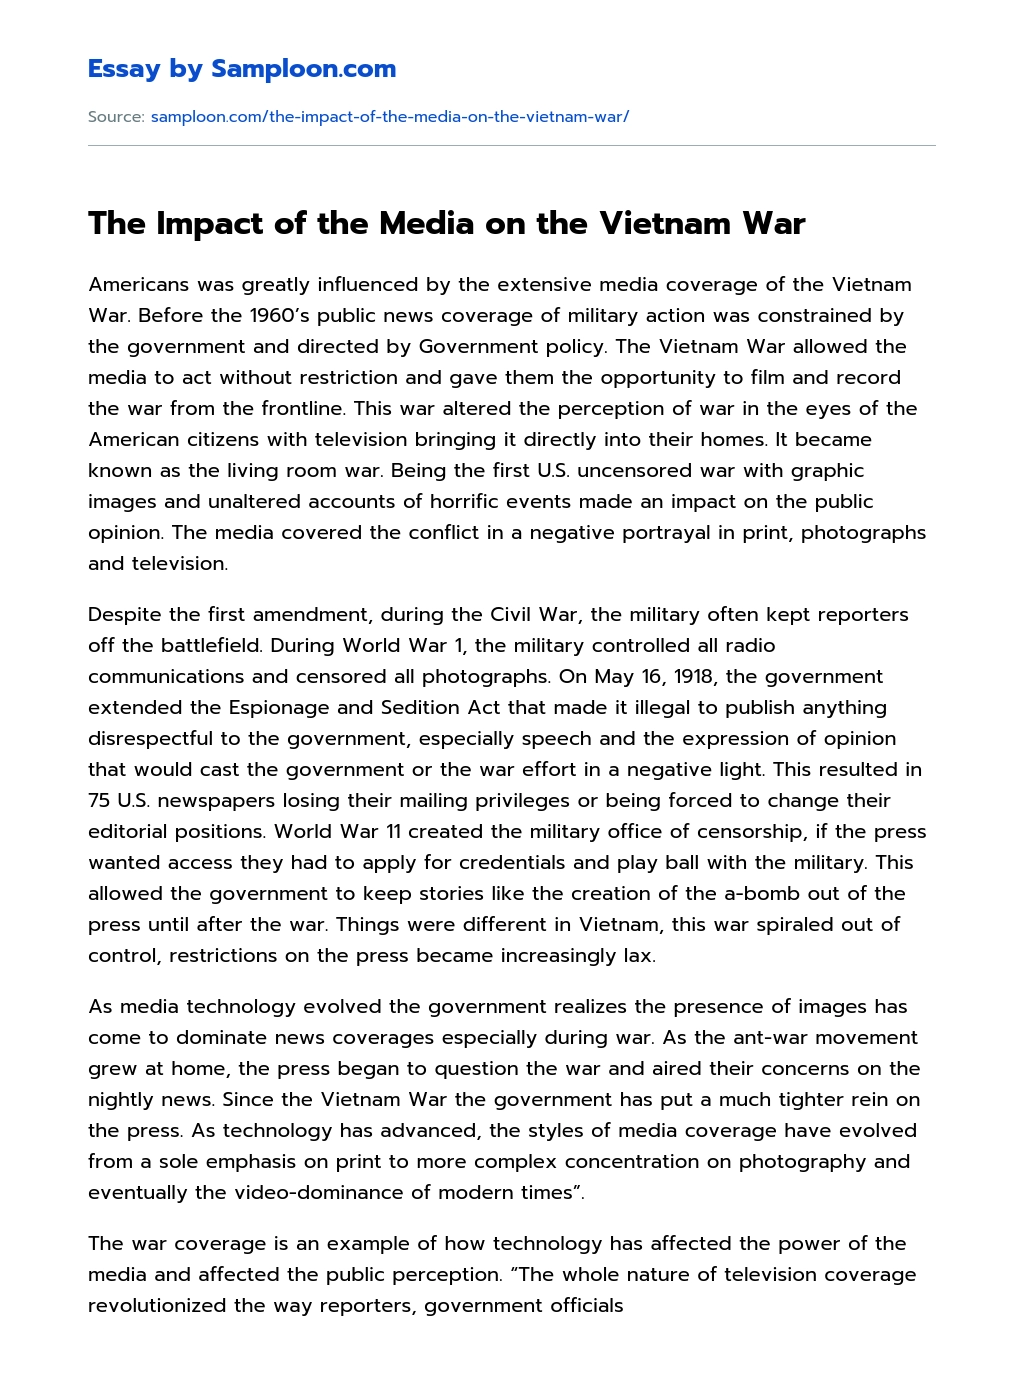 The Impact of the Media on the Vietnam War essay